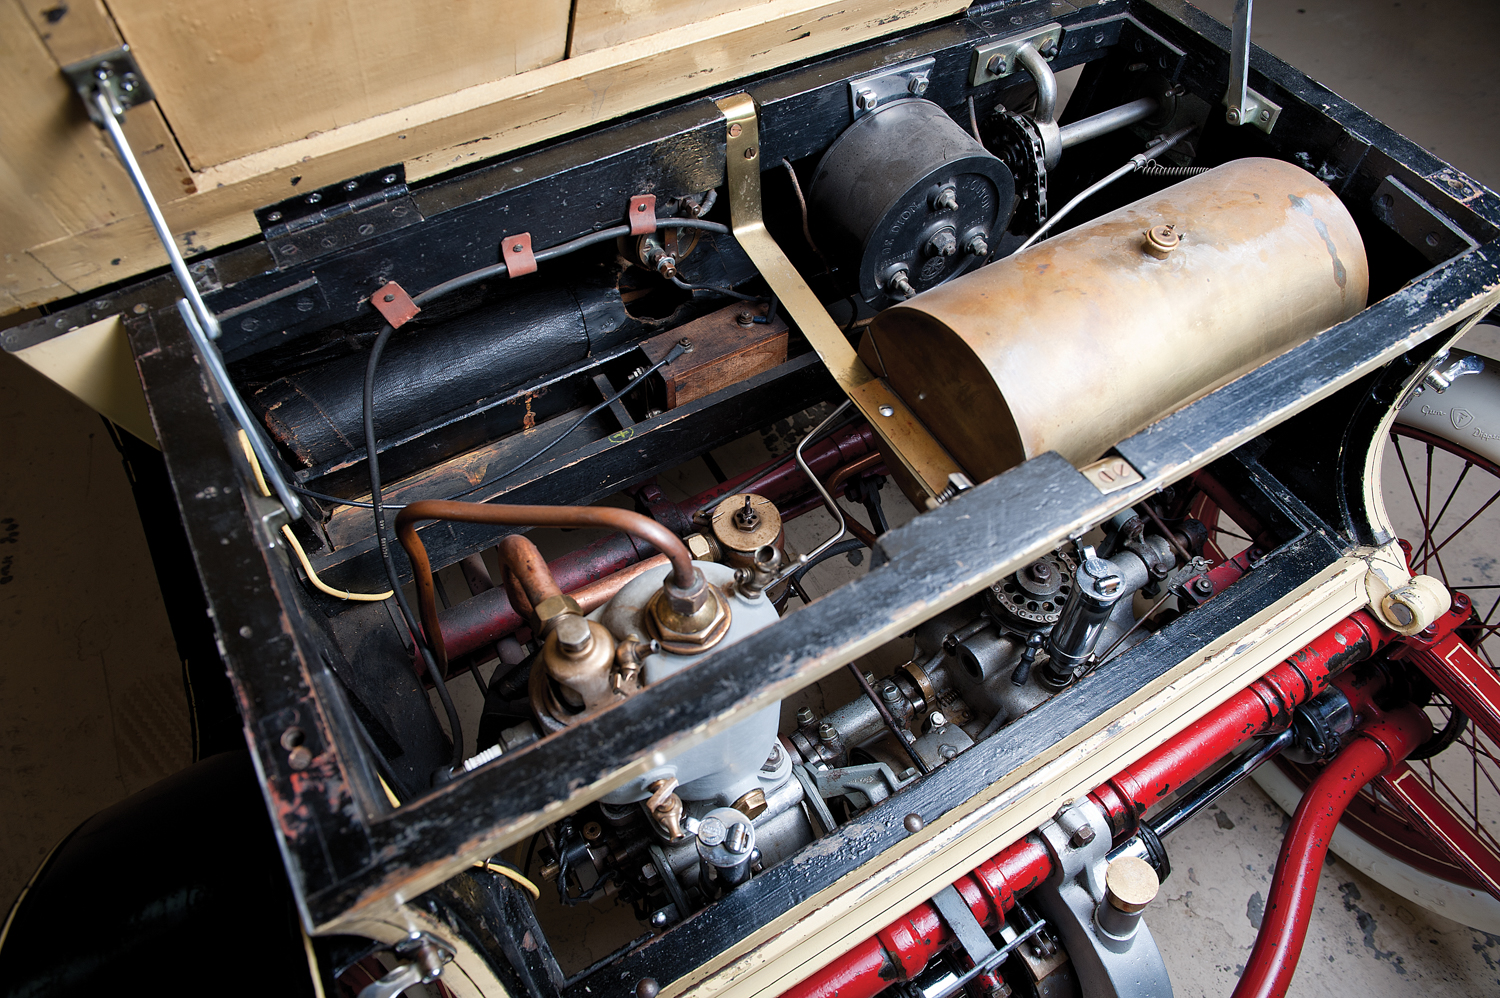 1901 De Dion-Bouton New York Type Motorette, Photo: RM Sotheby's Aaron Summerfield ©2014 Courtesy of RM Auctions